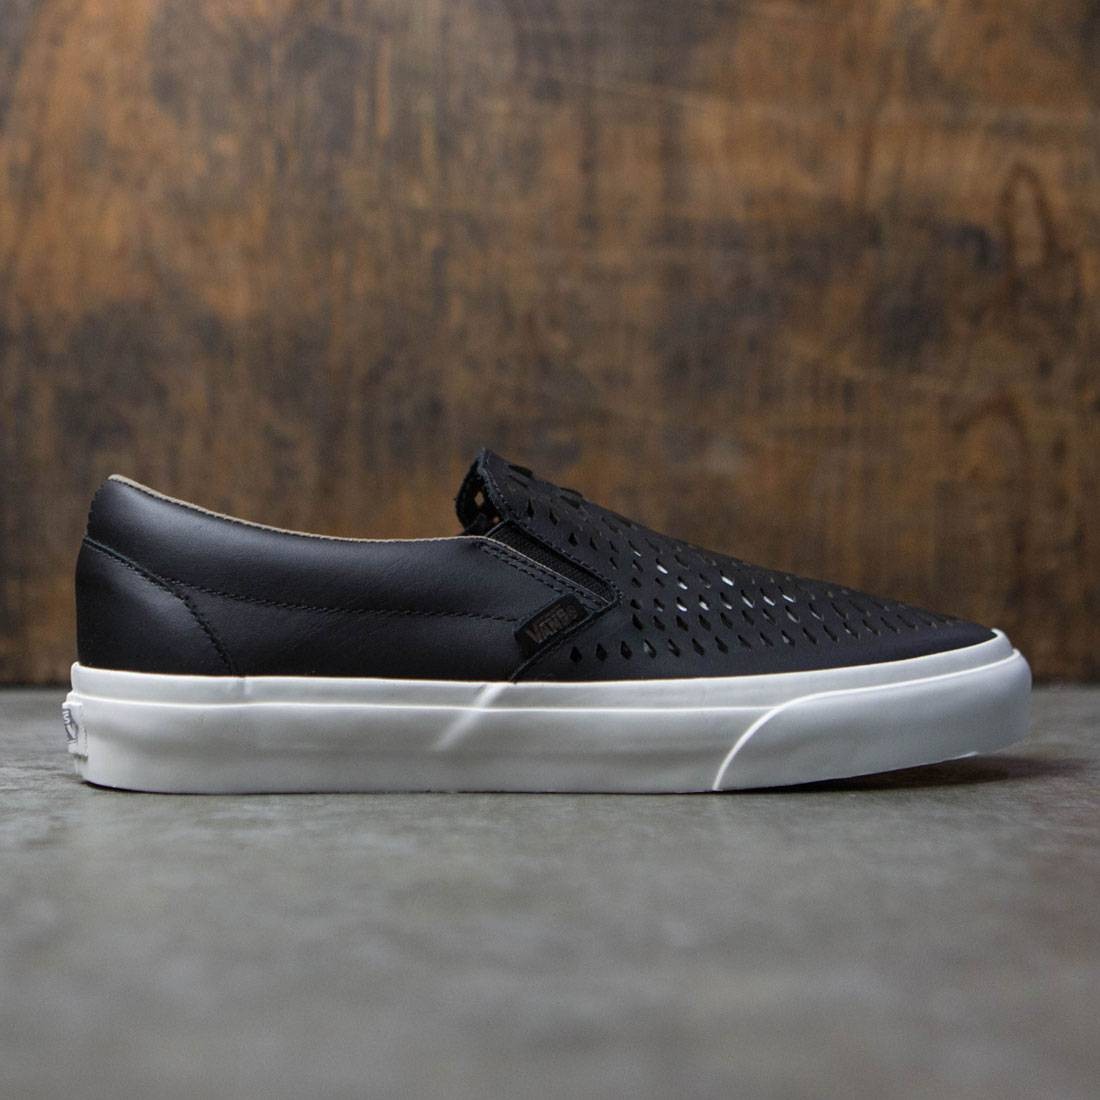 vans classic slip on black perforated leather